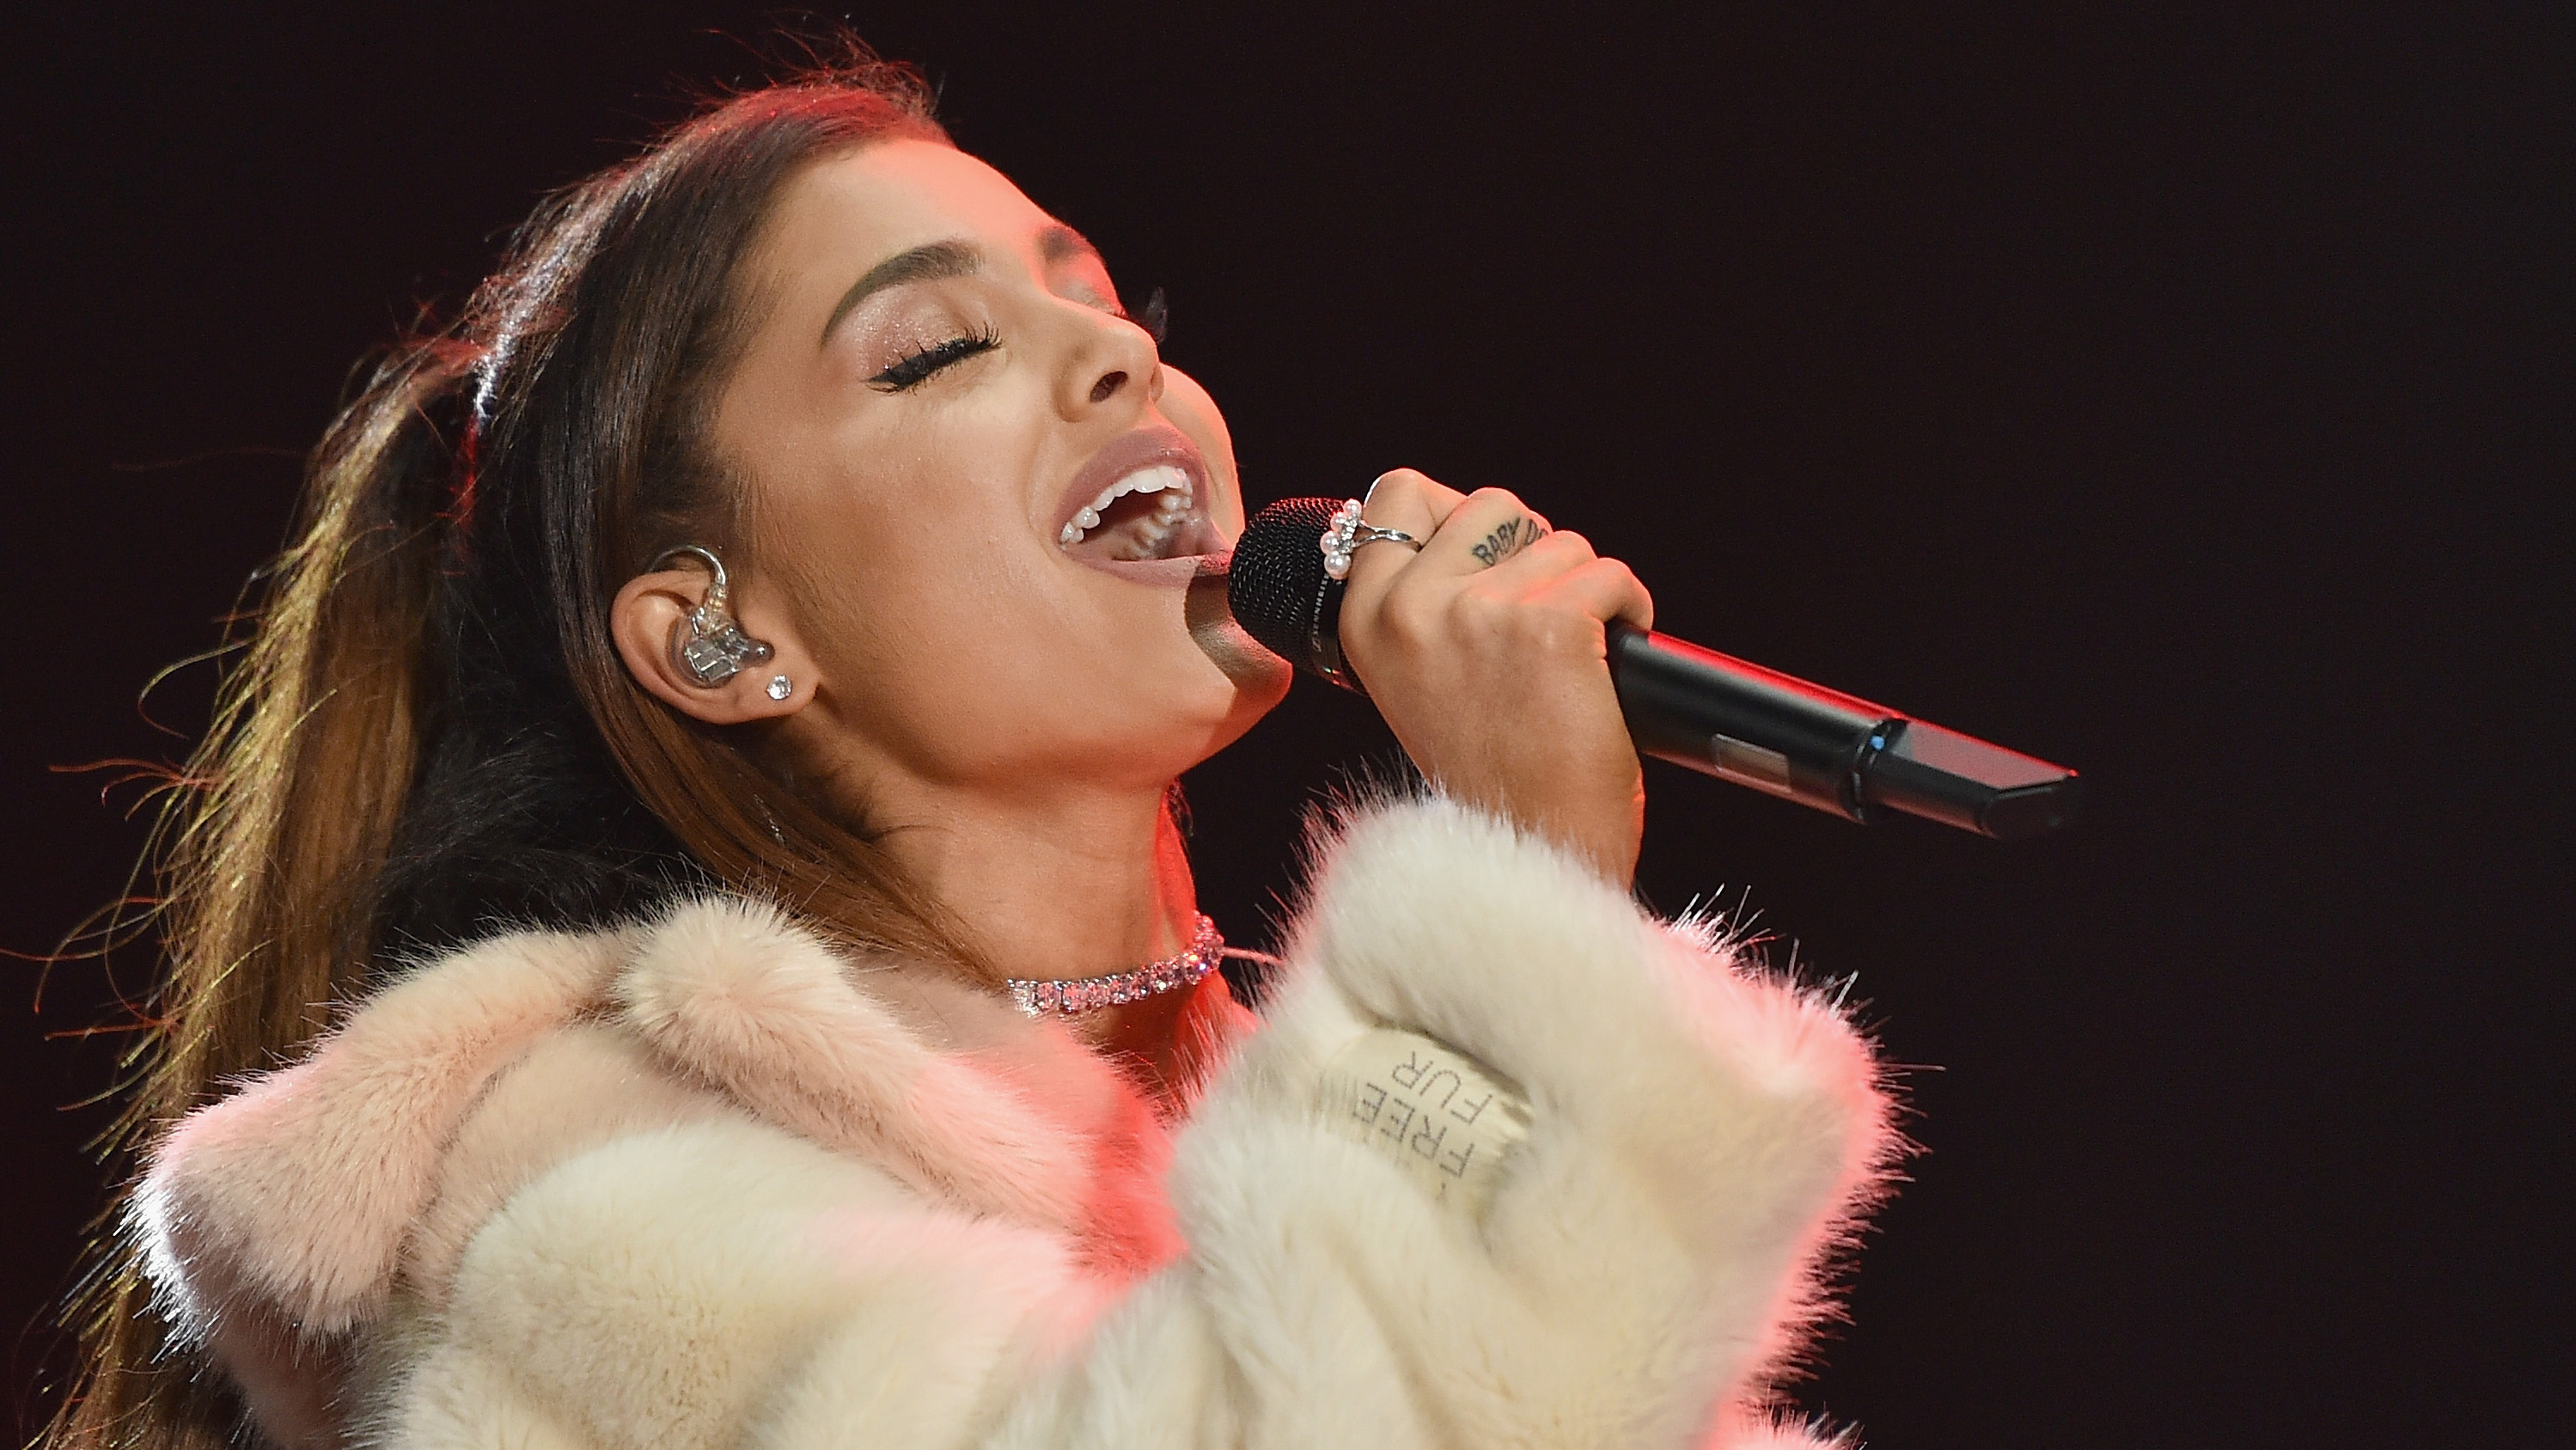 Ariana Grande Nude Xxx - Start talking about Ariana Grande's fight for equality â€” not...